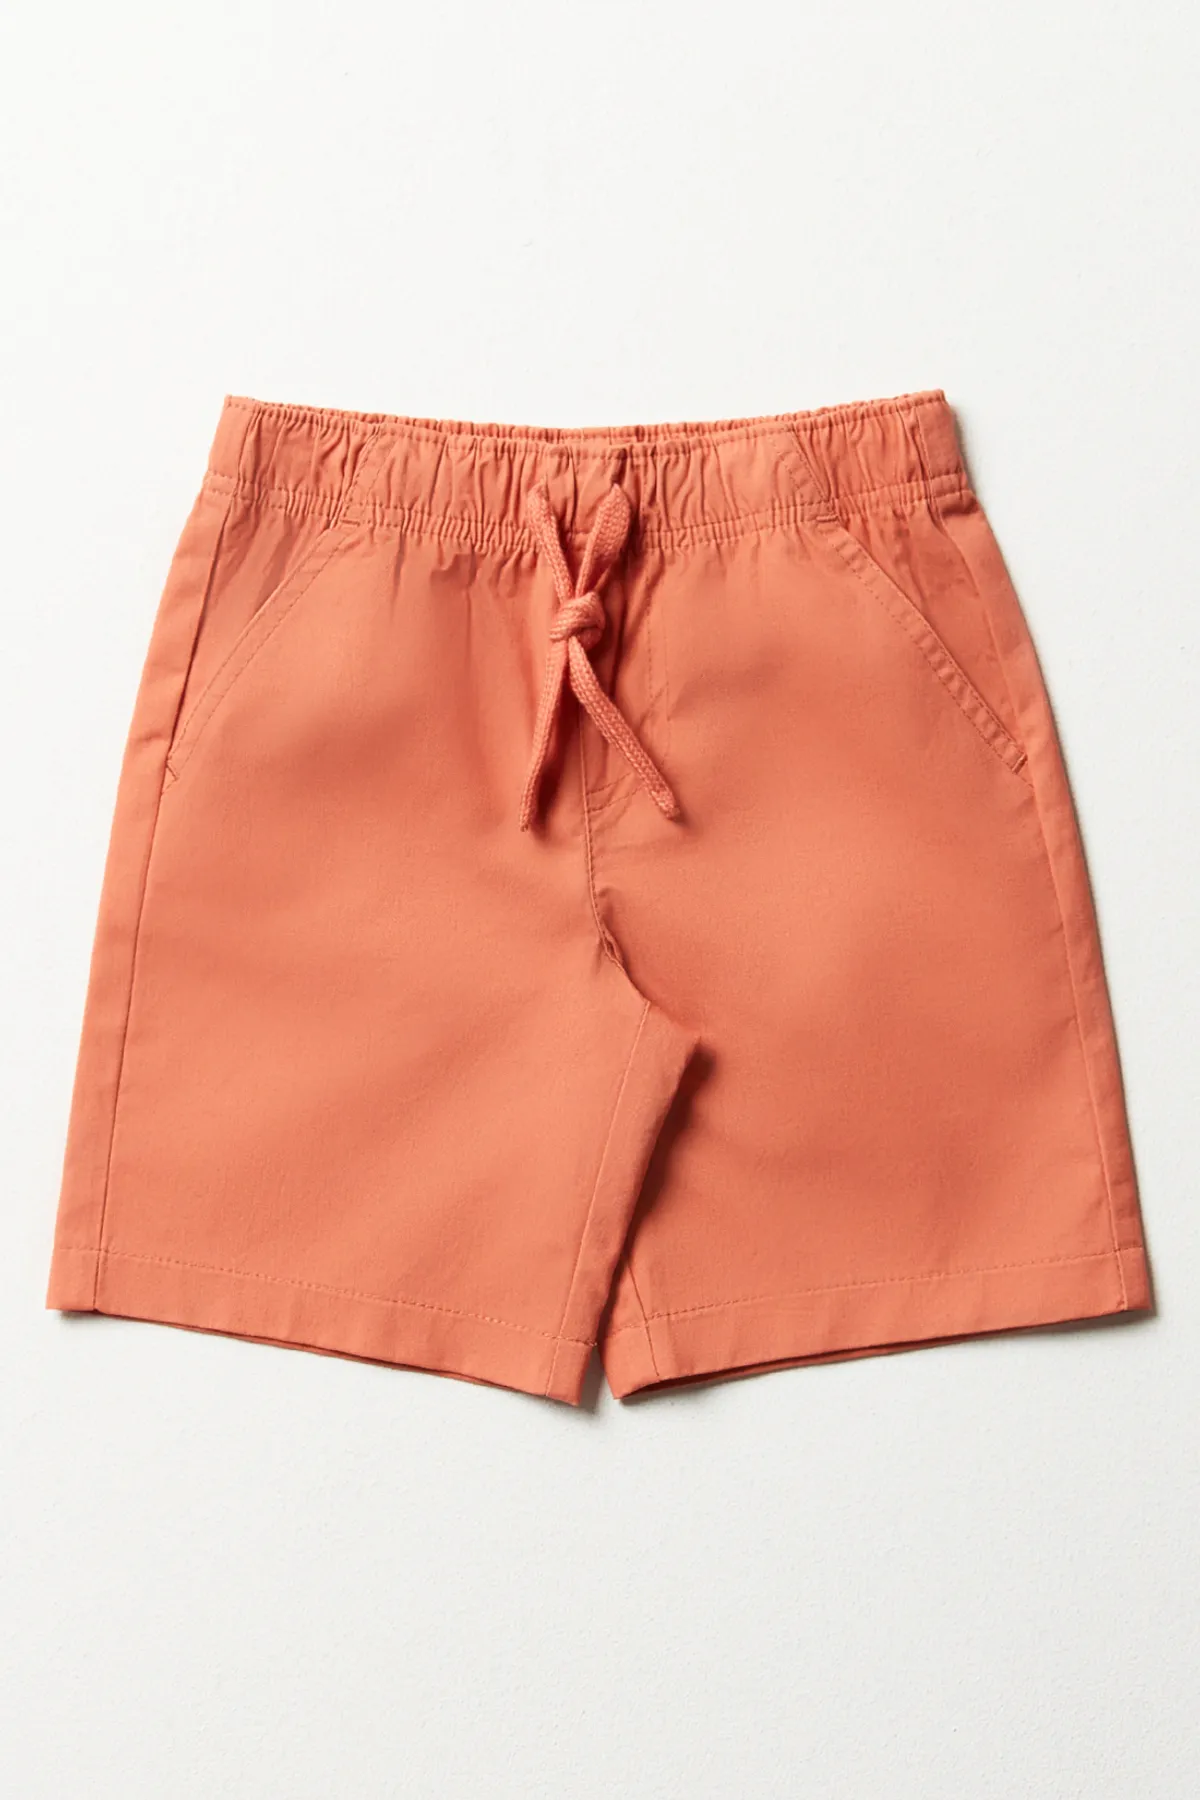 Shorts red - BOYS 2-10 YEARS Bottoms & Jeans